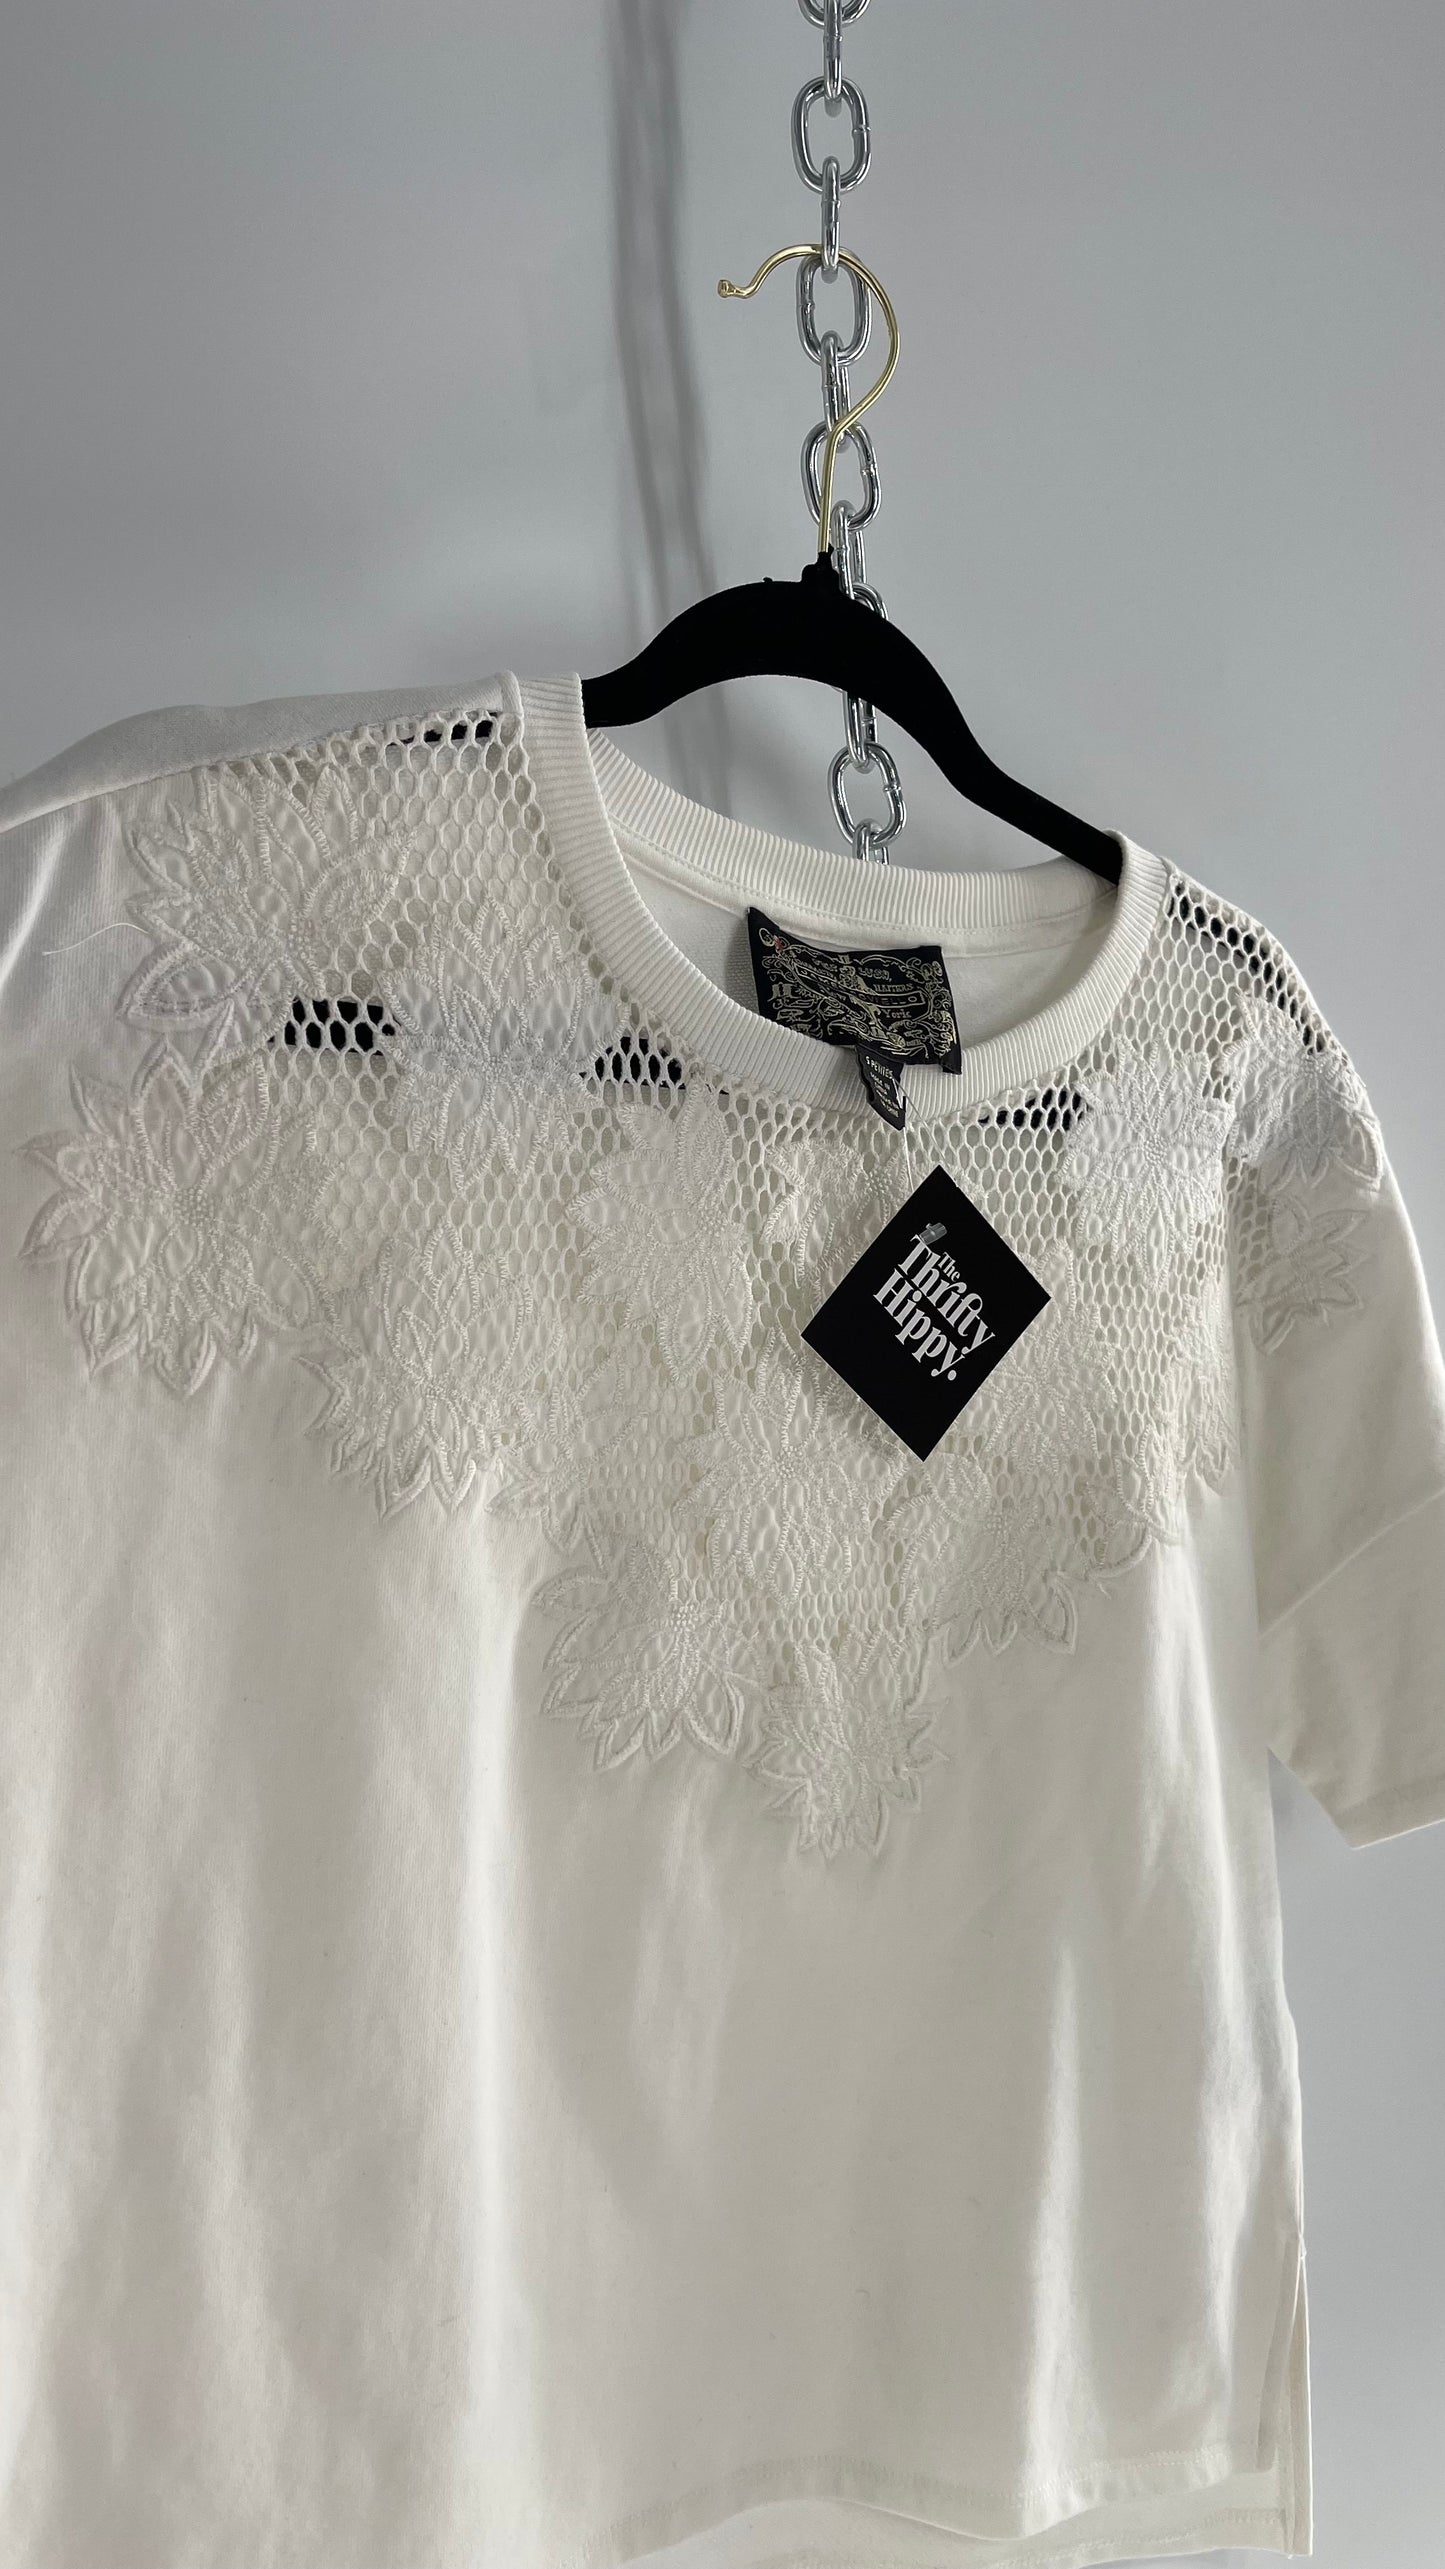 JAMES COVIELLO NY, NY White Thick T Shirt with Embroidered Florals and Mesh (S Petite)